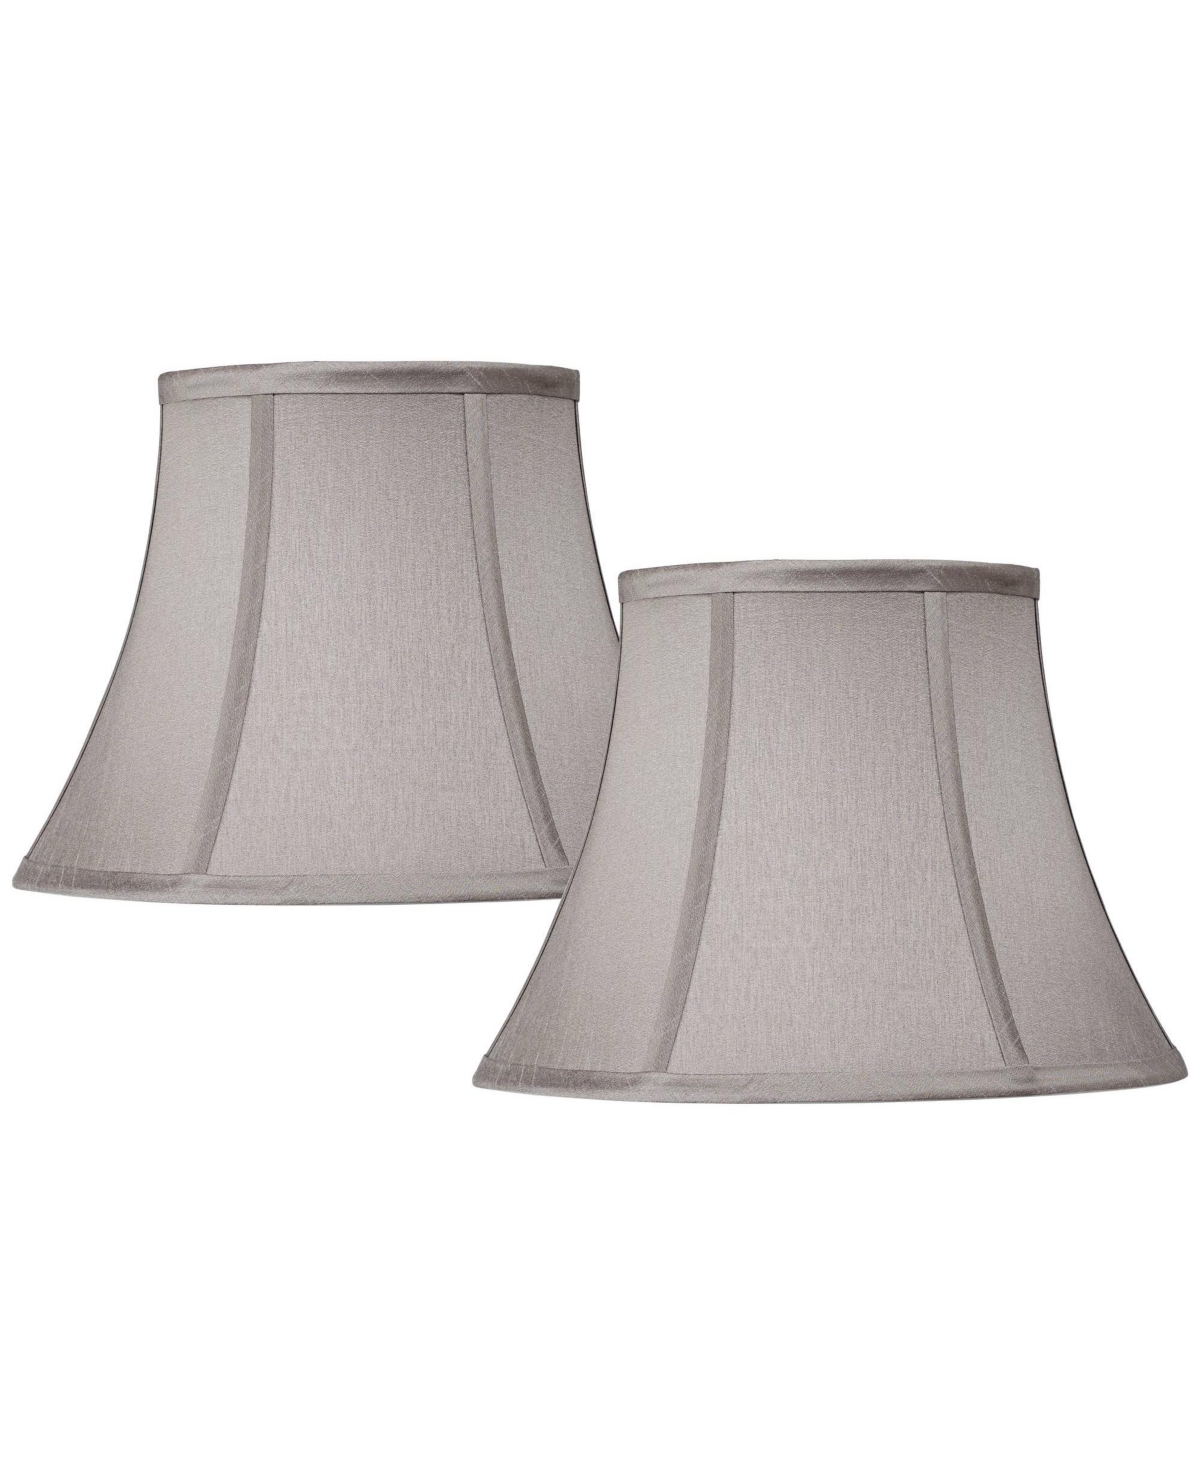 Springcrest Set Of 2 Pewter Gray Small Bell Lamp Shades 7" Top X 12" Bottom X 9" High (spider) Replacement With In Grey